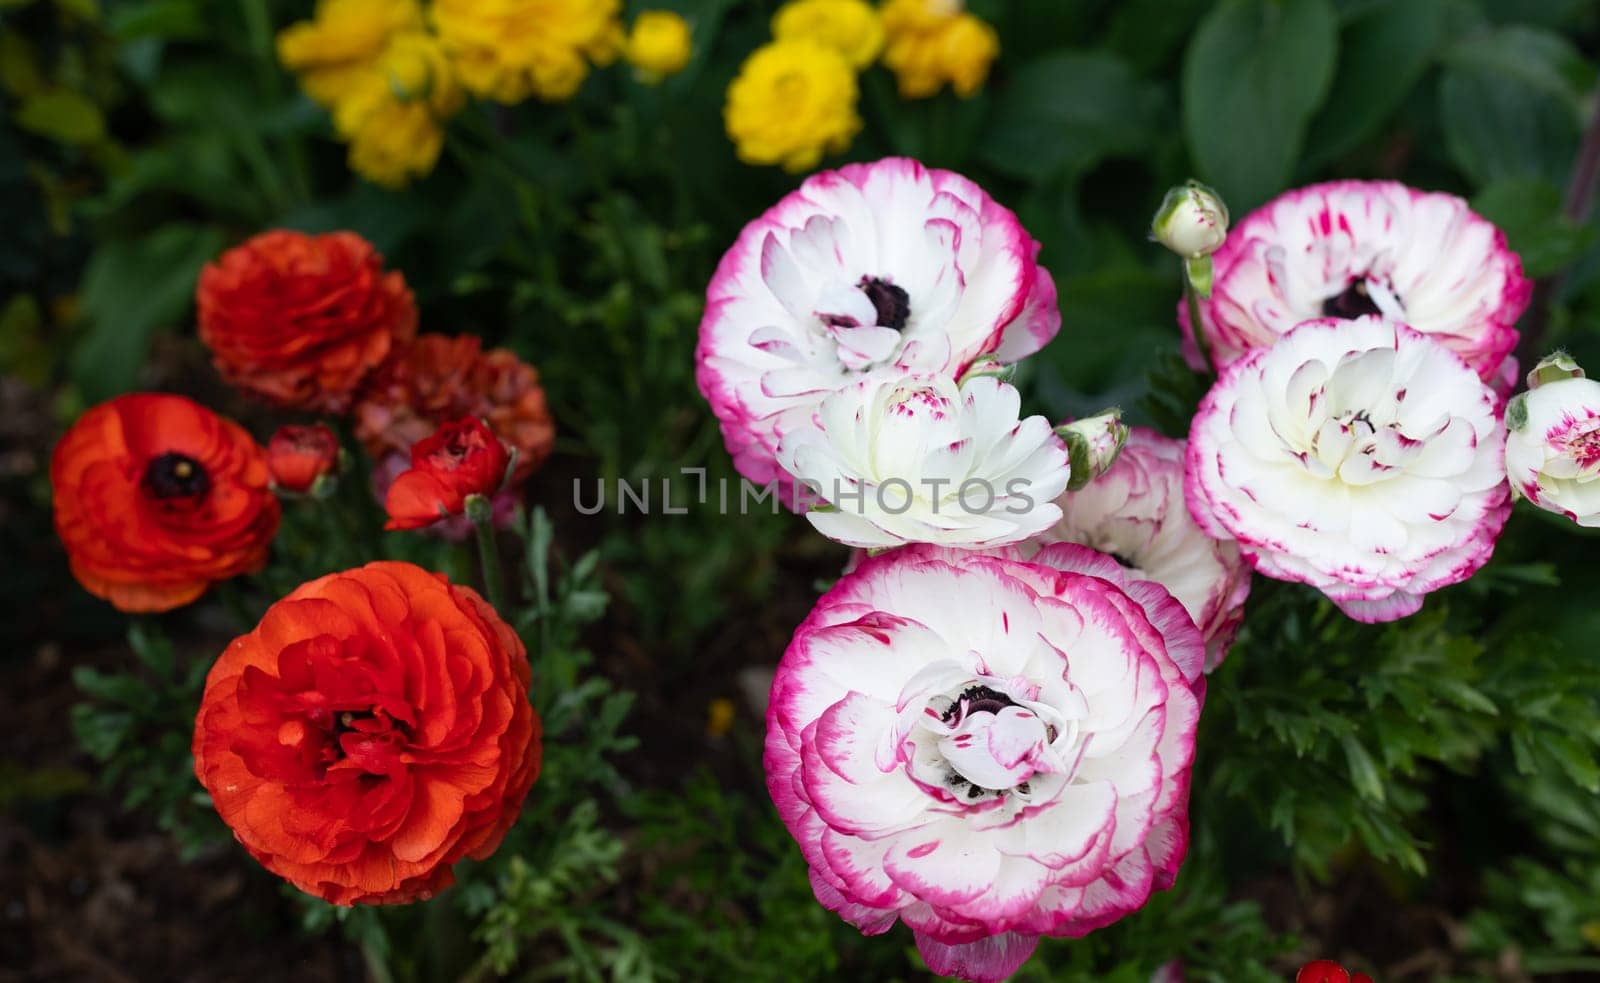 Multi Colored Rimmed Persian Buttercup Flower Or Ranunculus Asiaticus Outdoors In Garden Or Plant Nursery. Red, Yellow, White And Purple Flowers, Botany, Floriculture. Horizontal Plane by netatsi